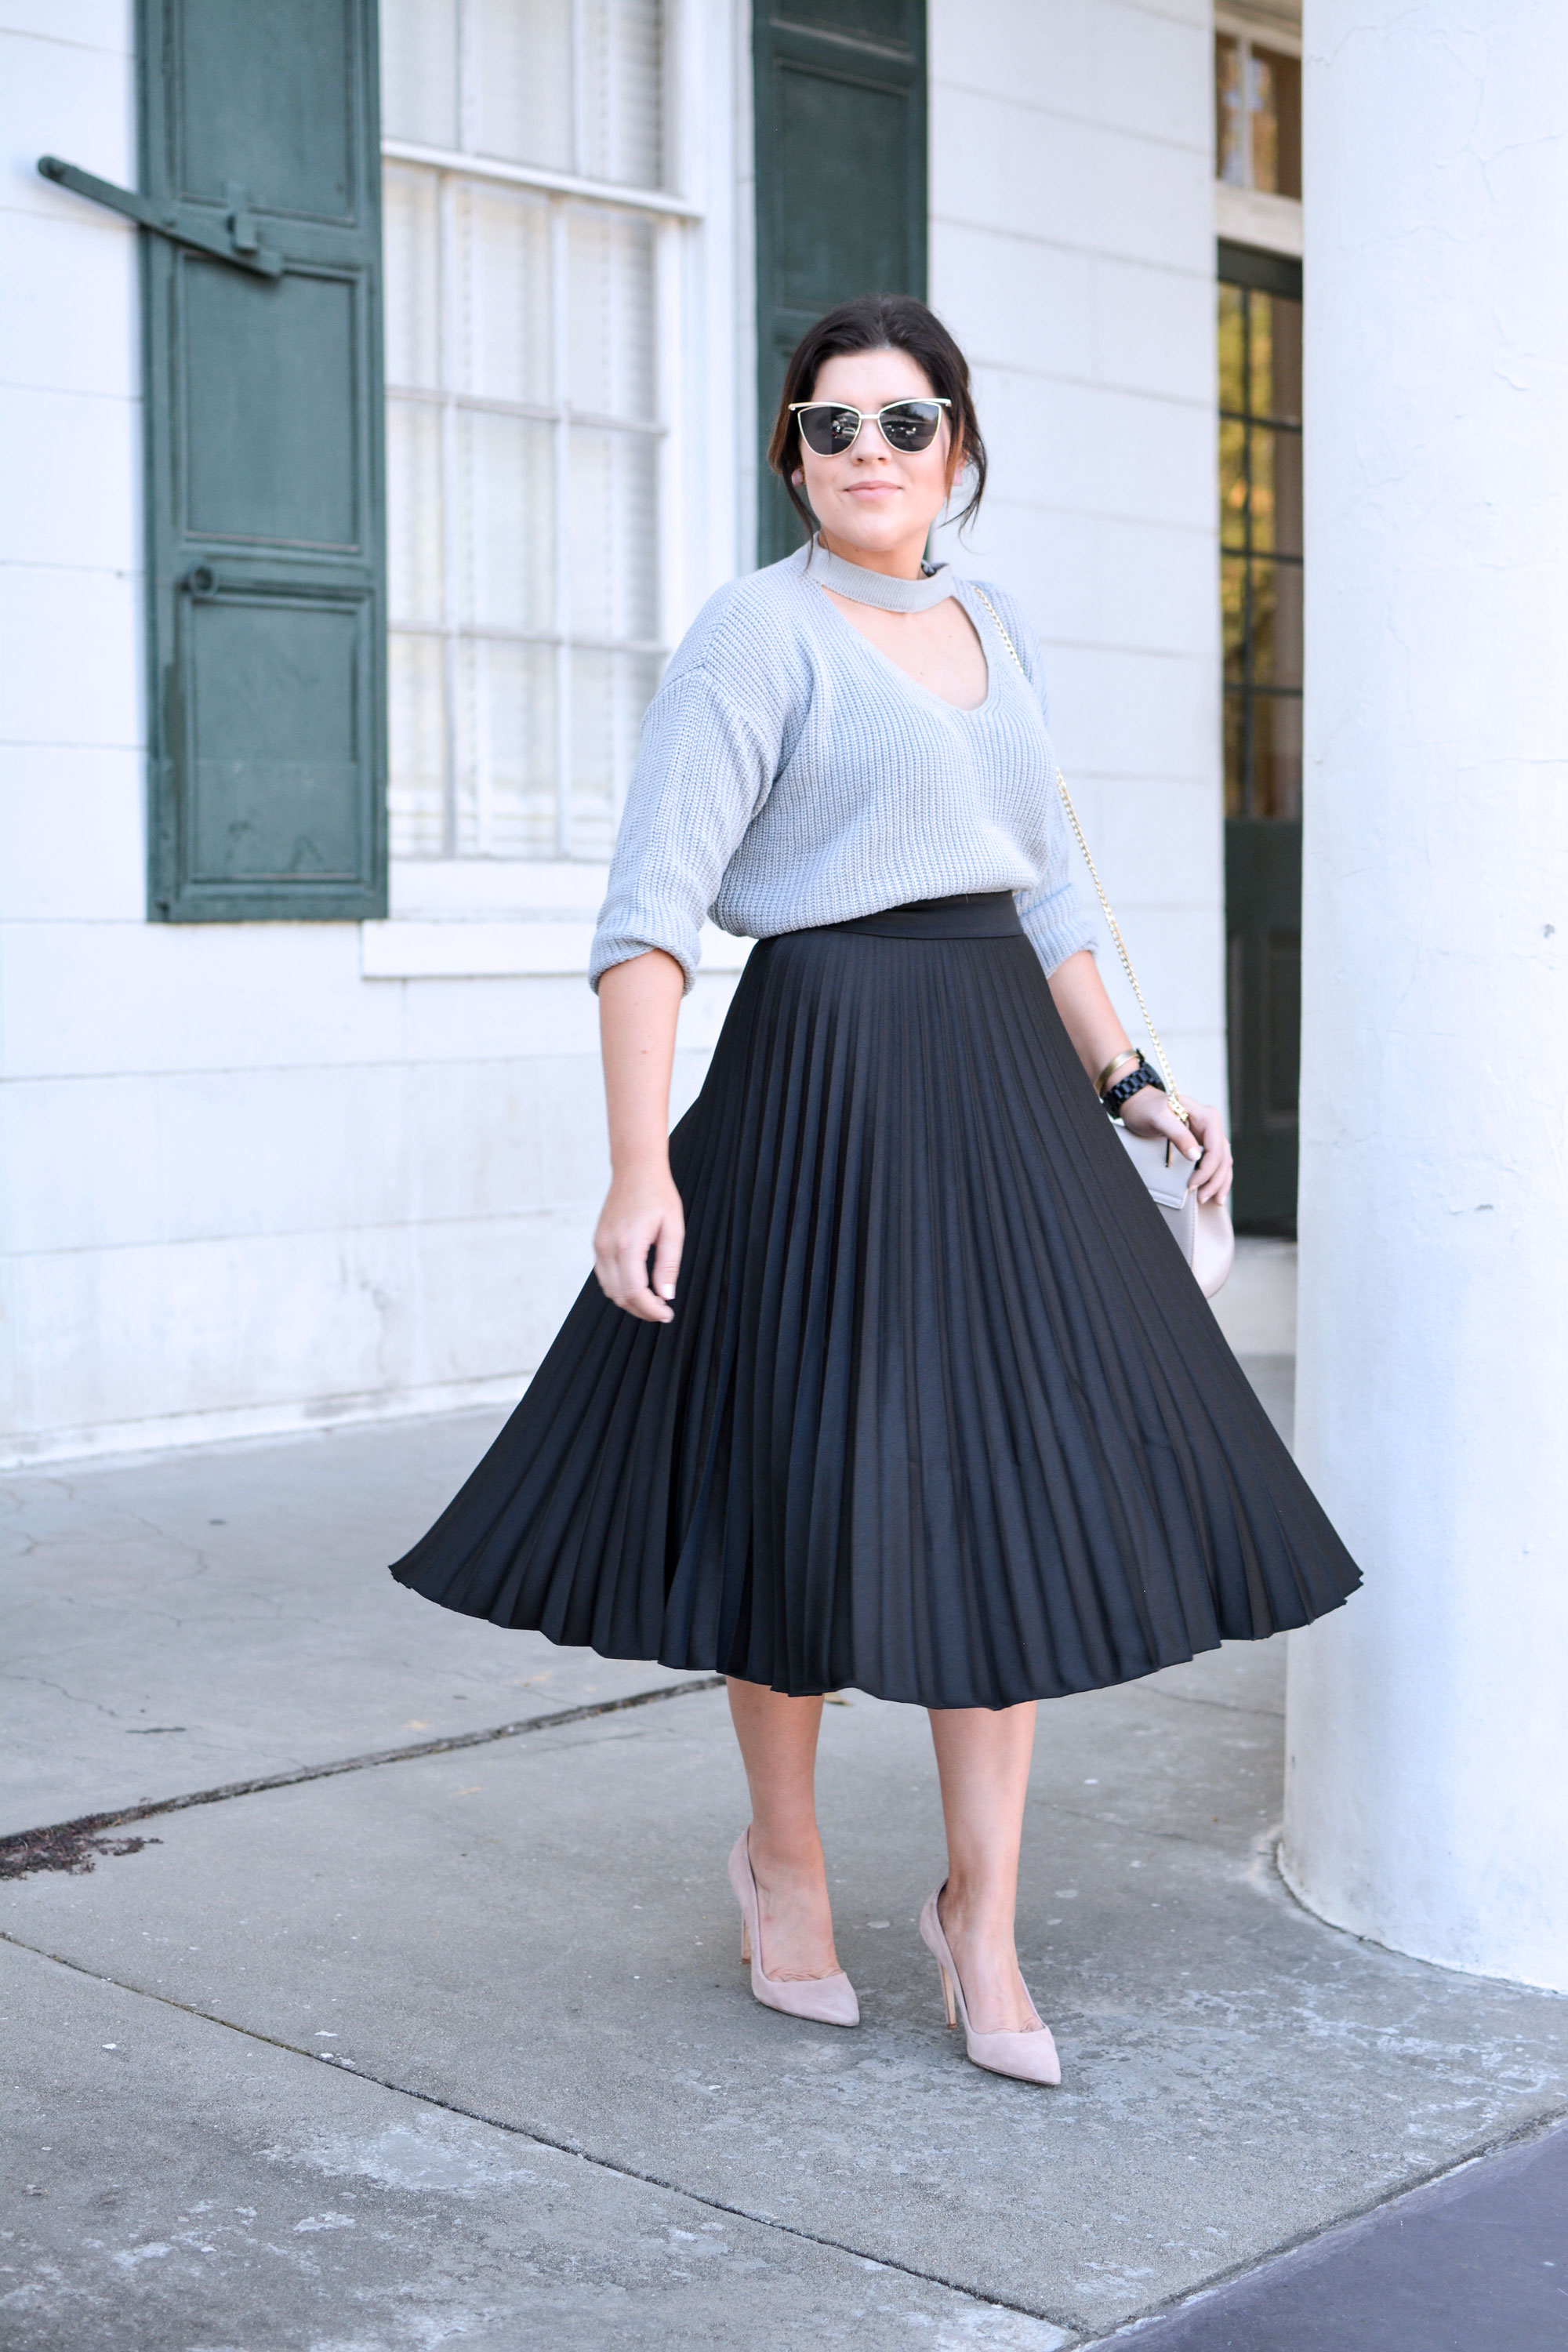 Skirts and Sweaters - Kassy On Design